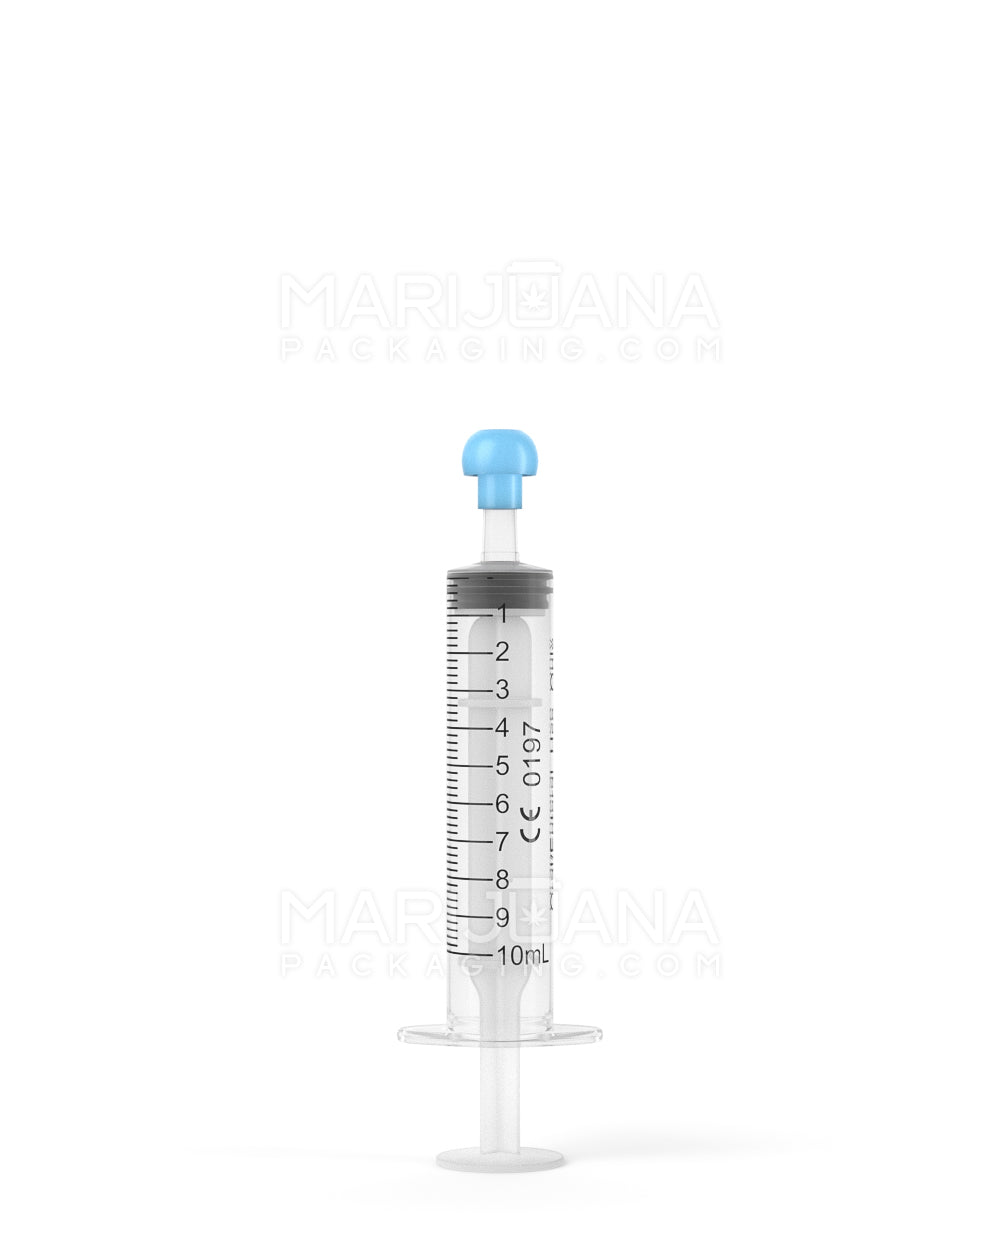 Plastic Oral Concentrate Syringes | 10mL - 1mL Increments - 100 Count - 8